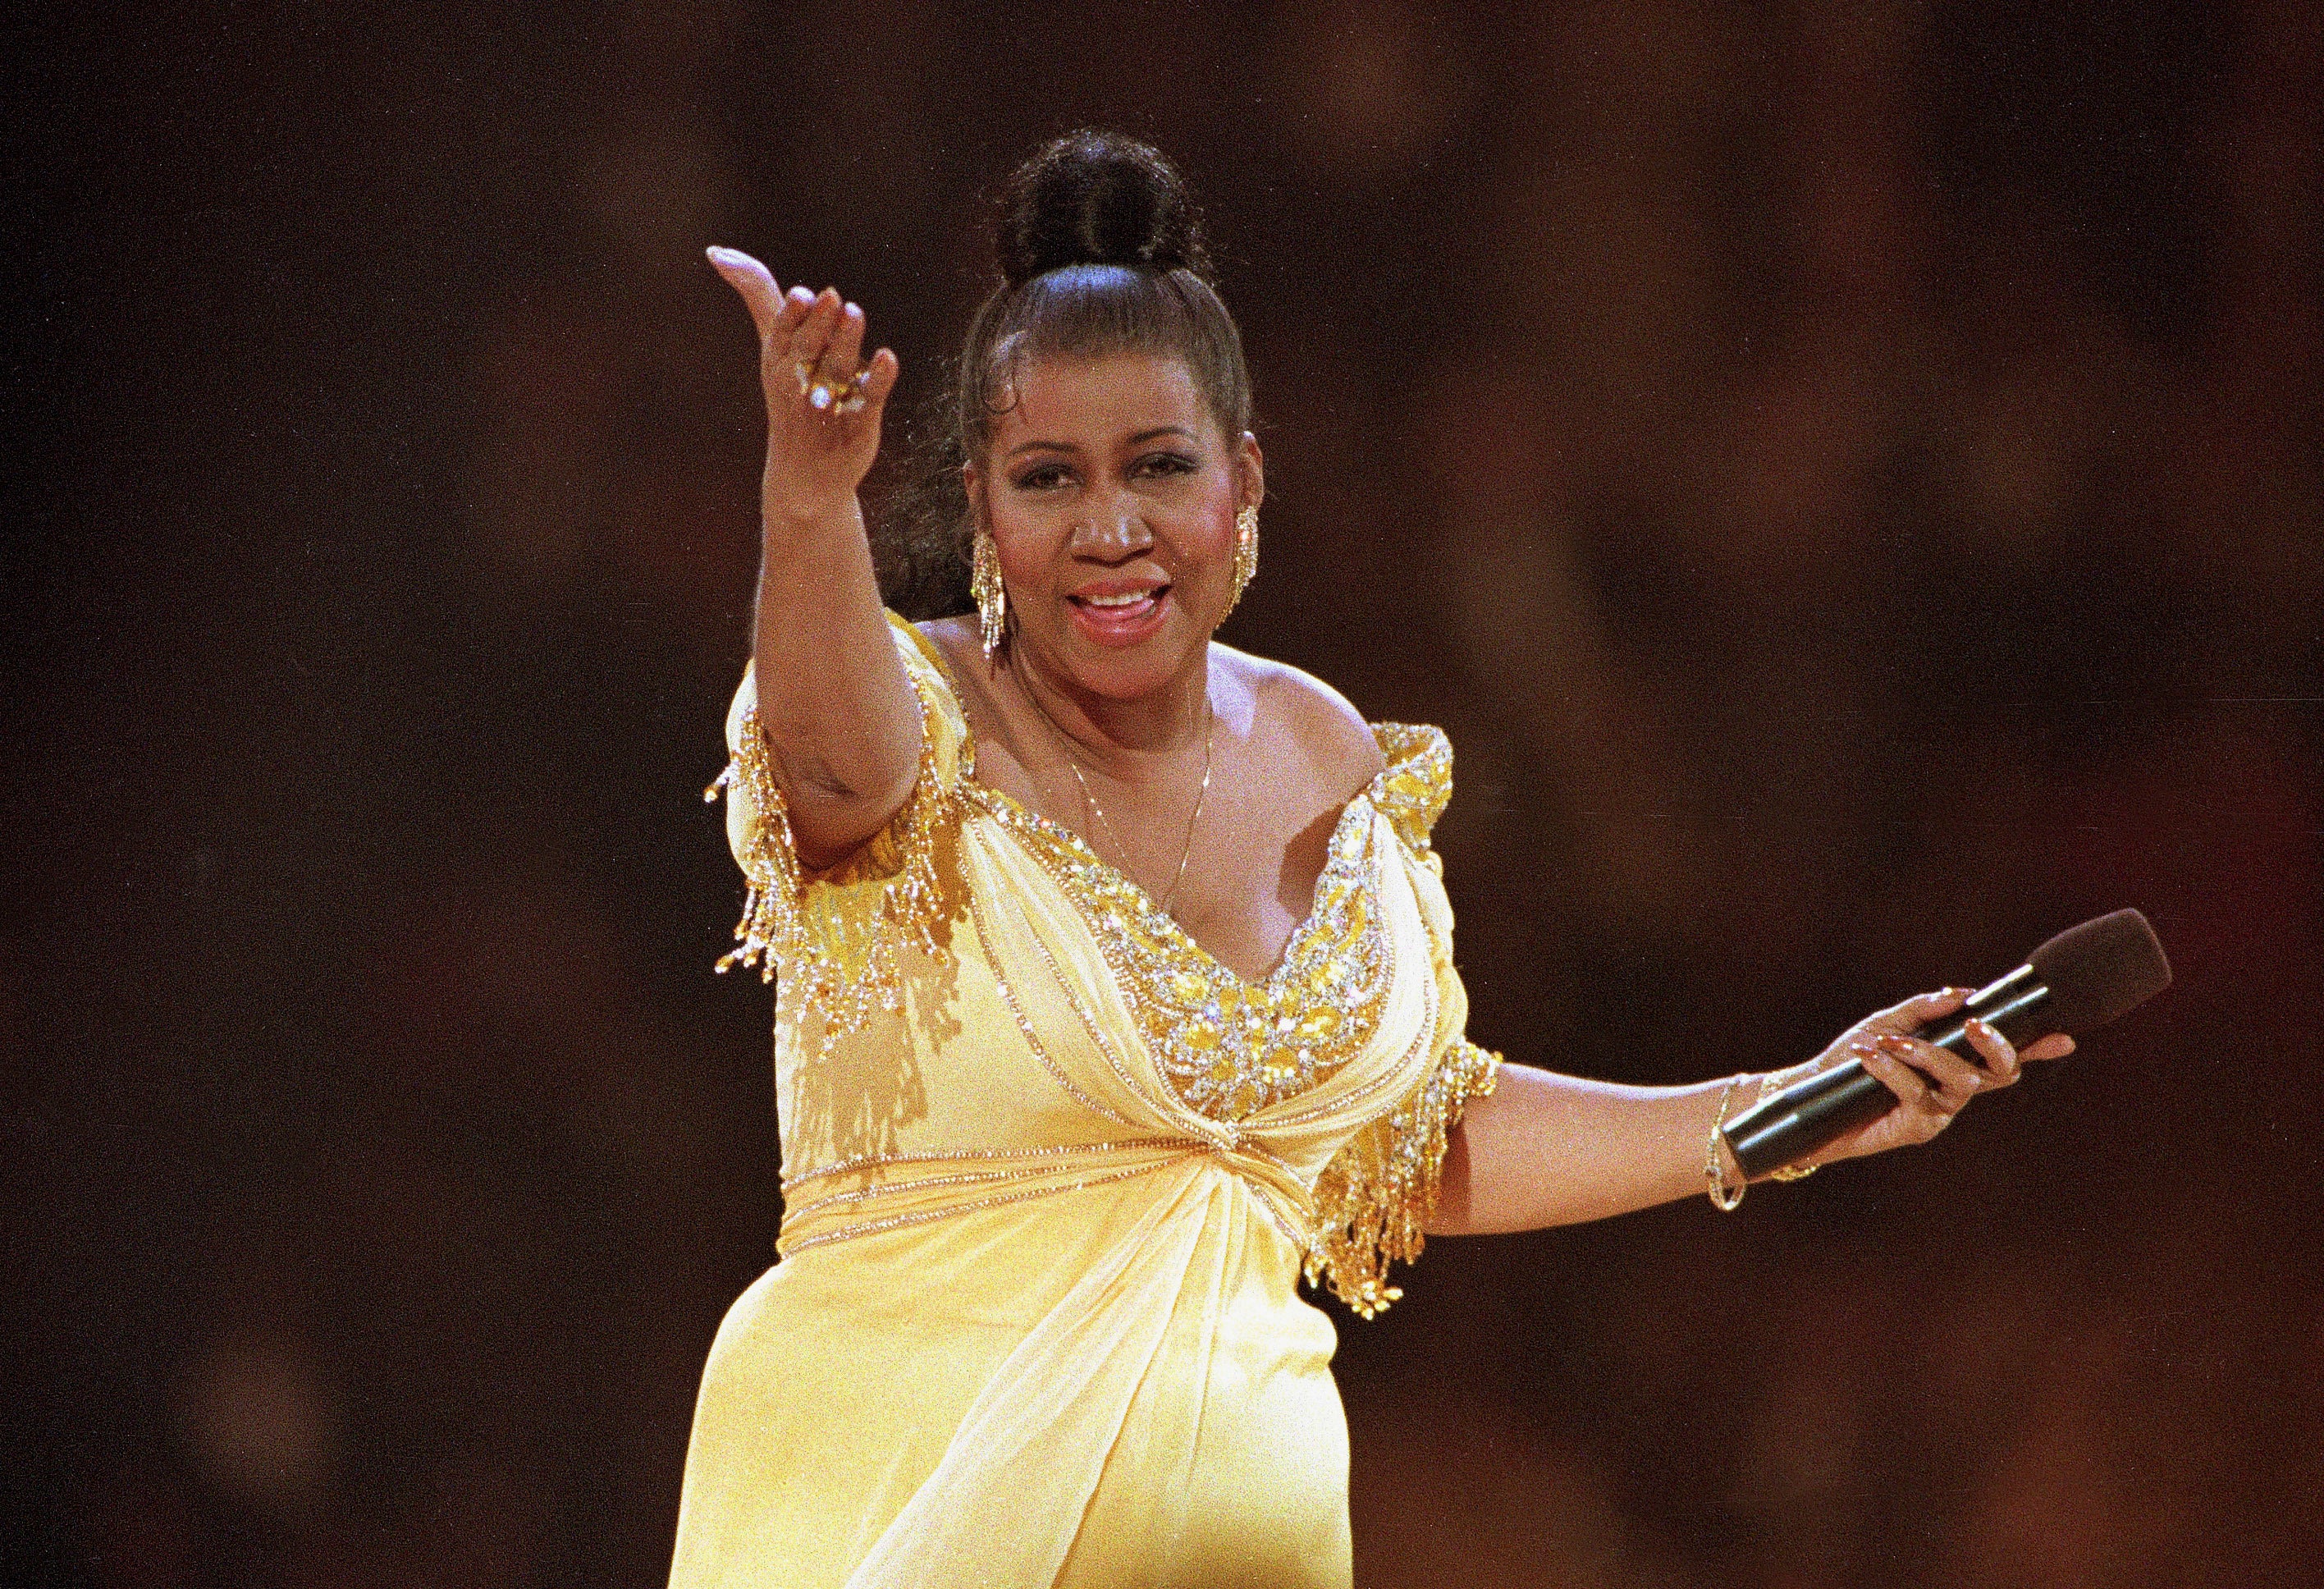 Thanks to cultural appropriation, Aretha Franklin transcended categories  dividing us - WHYY